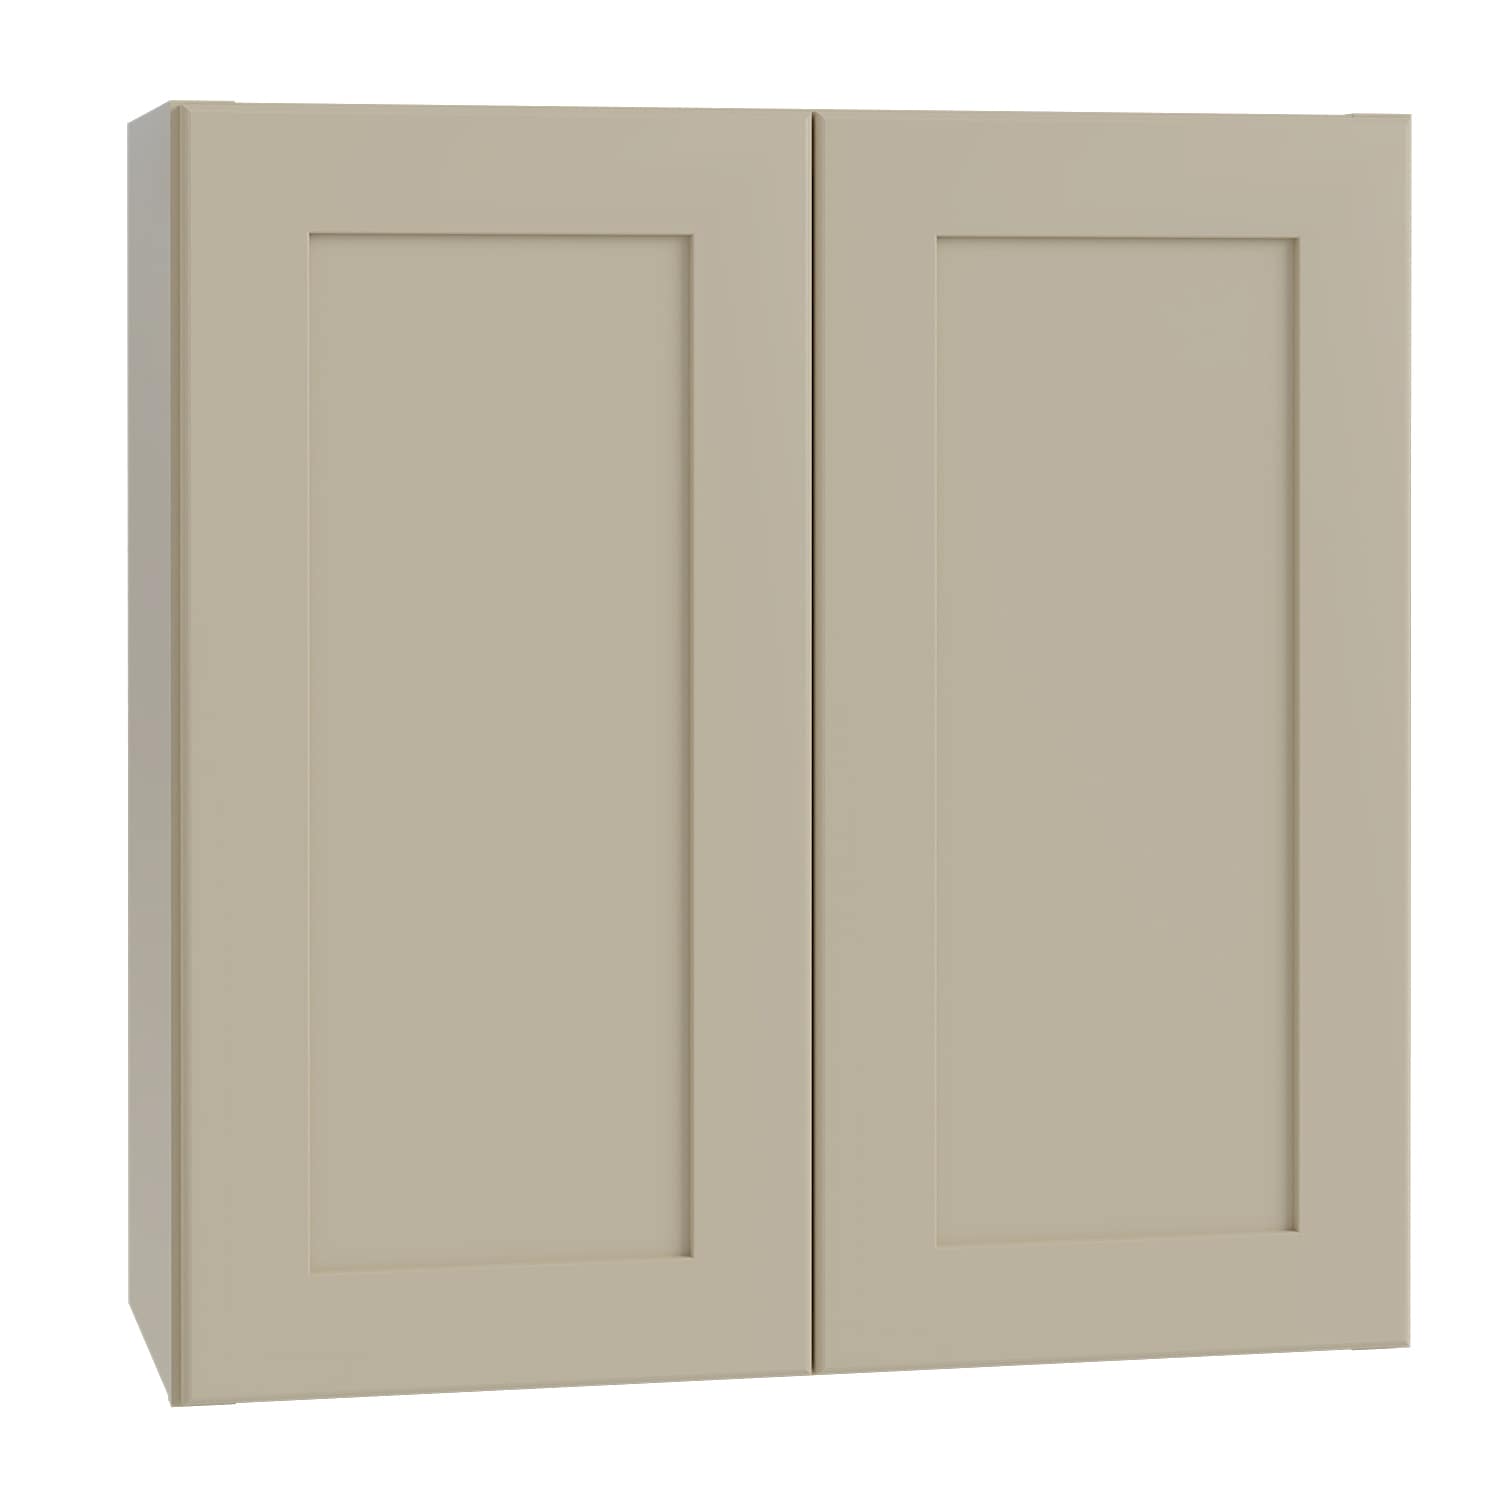 Luxxe Cabinetry 30-in W x 30-in H x 12-in D Norfolk Blended Cream Painted Door Wall Fully Assembled Semi-custom Cabinet in Off-White | W3030-NBC